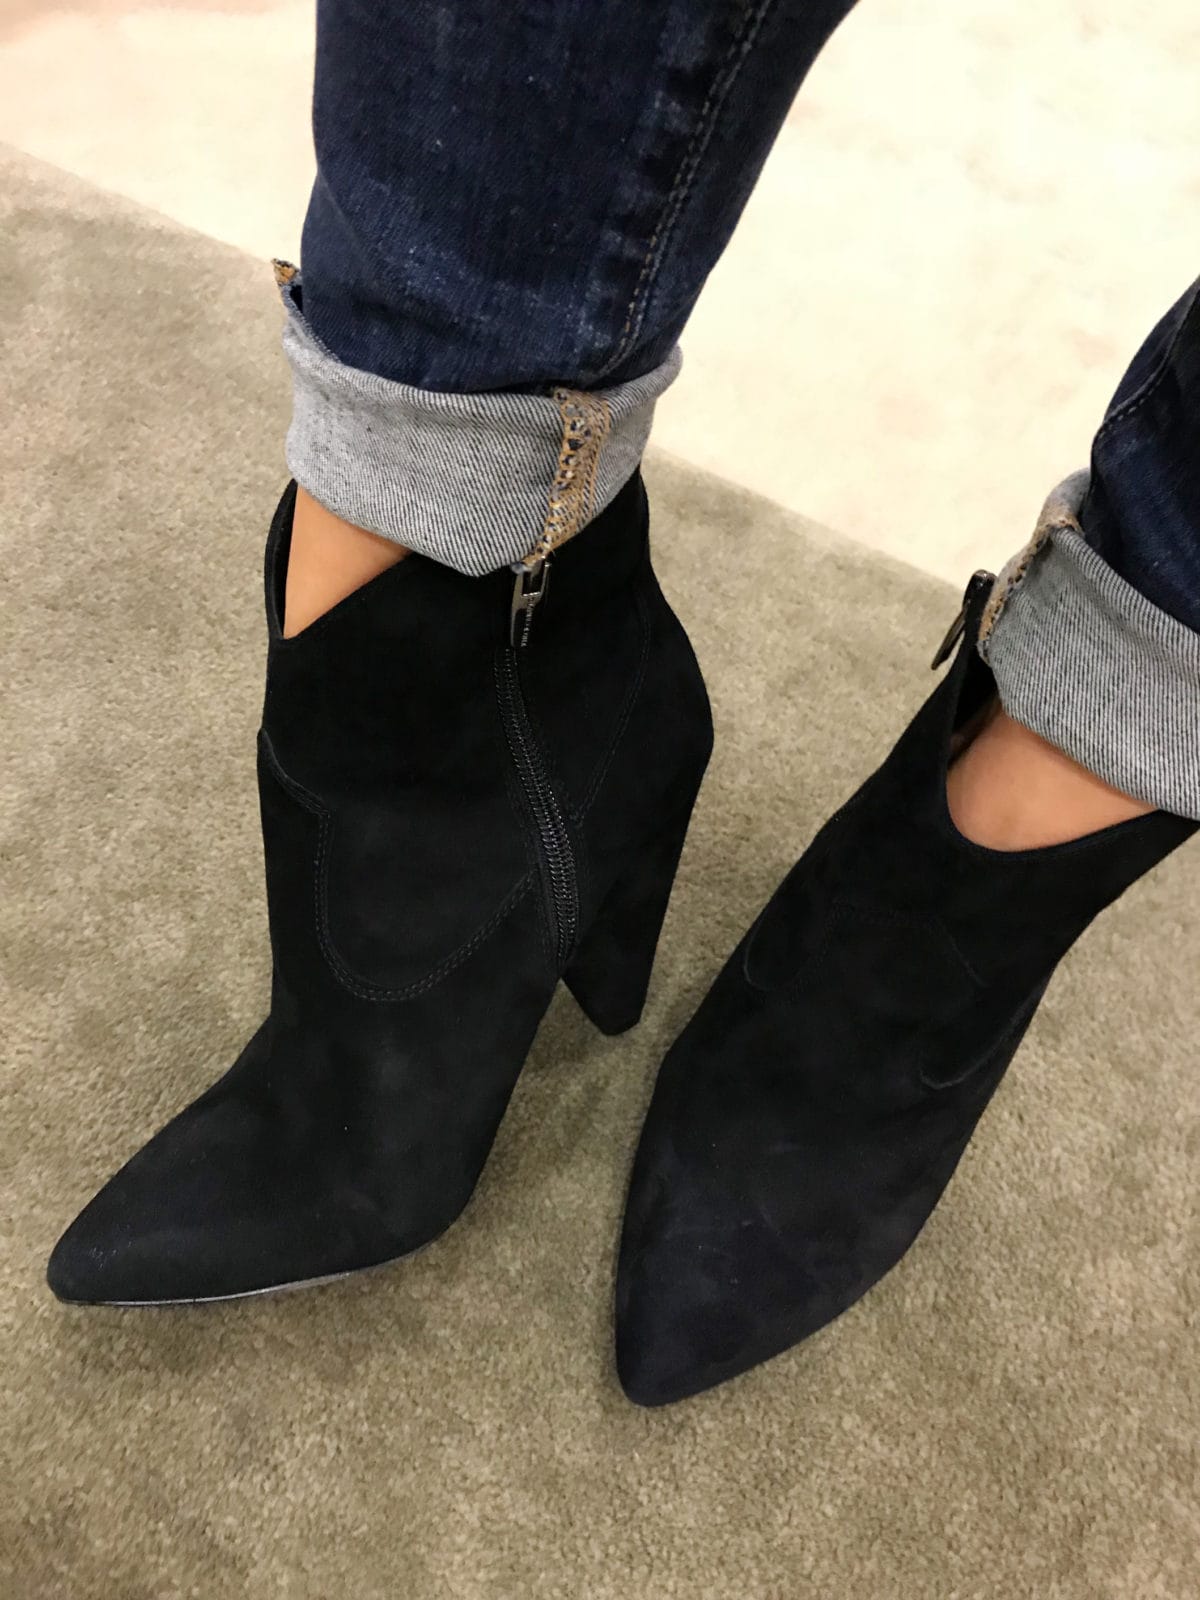 2018 nordstrom anniversary sale suede booties try on haul